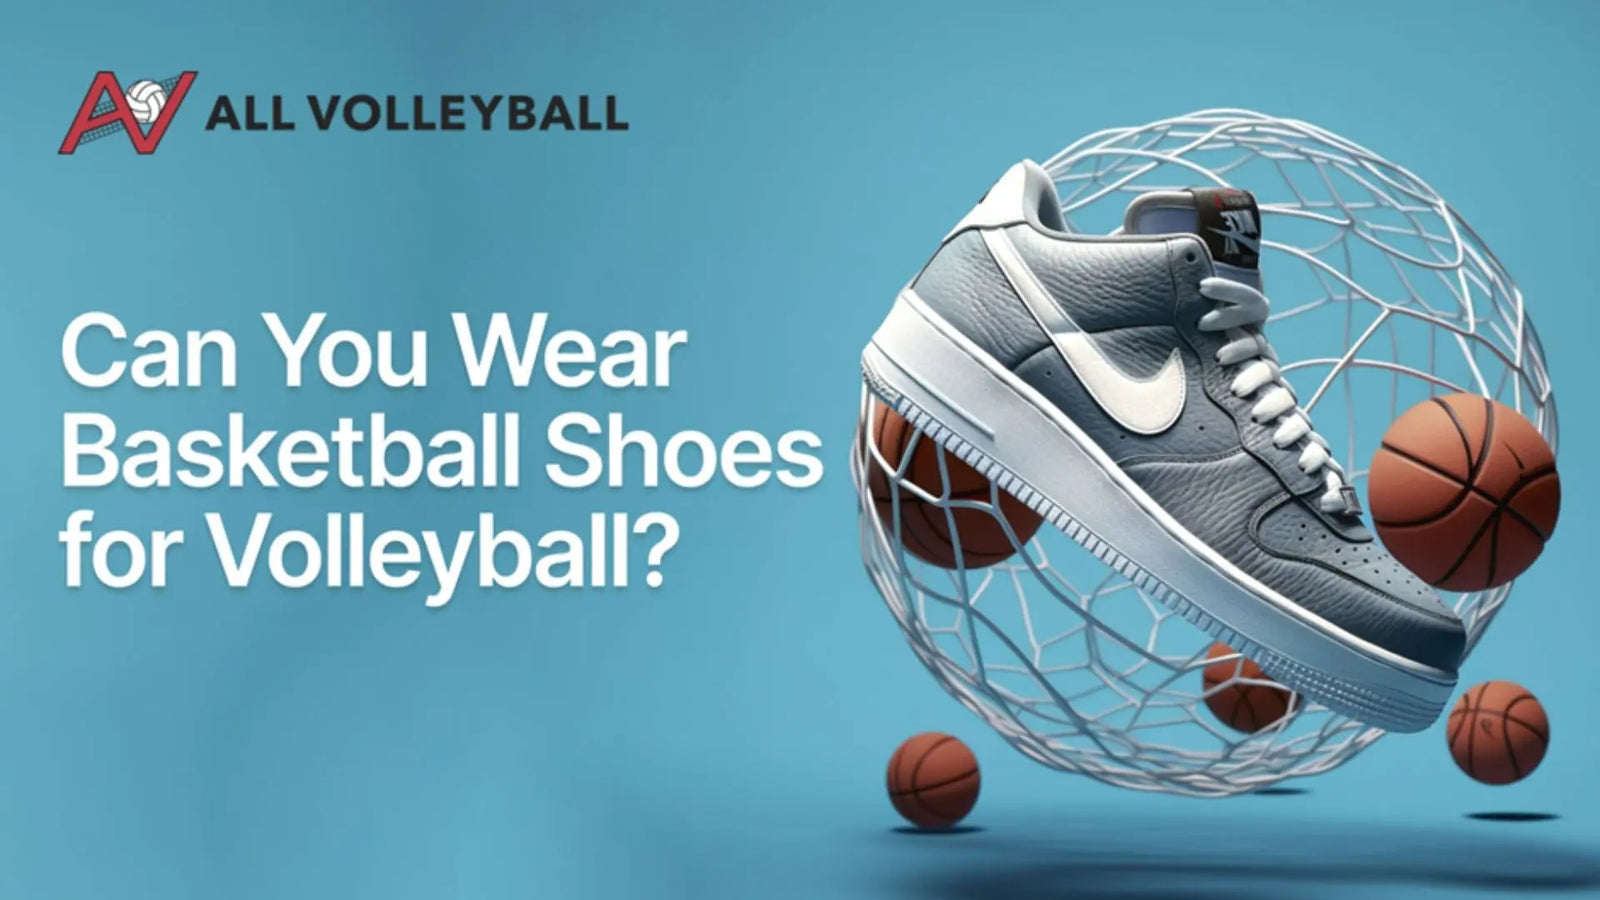 Can You Wear Basketball Shoes for Volleyball?